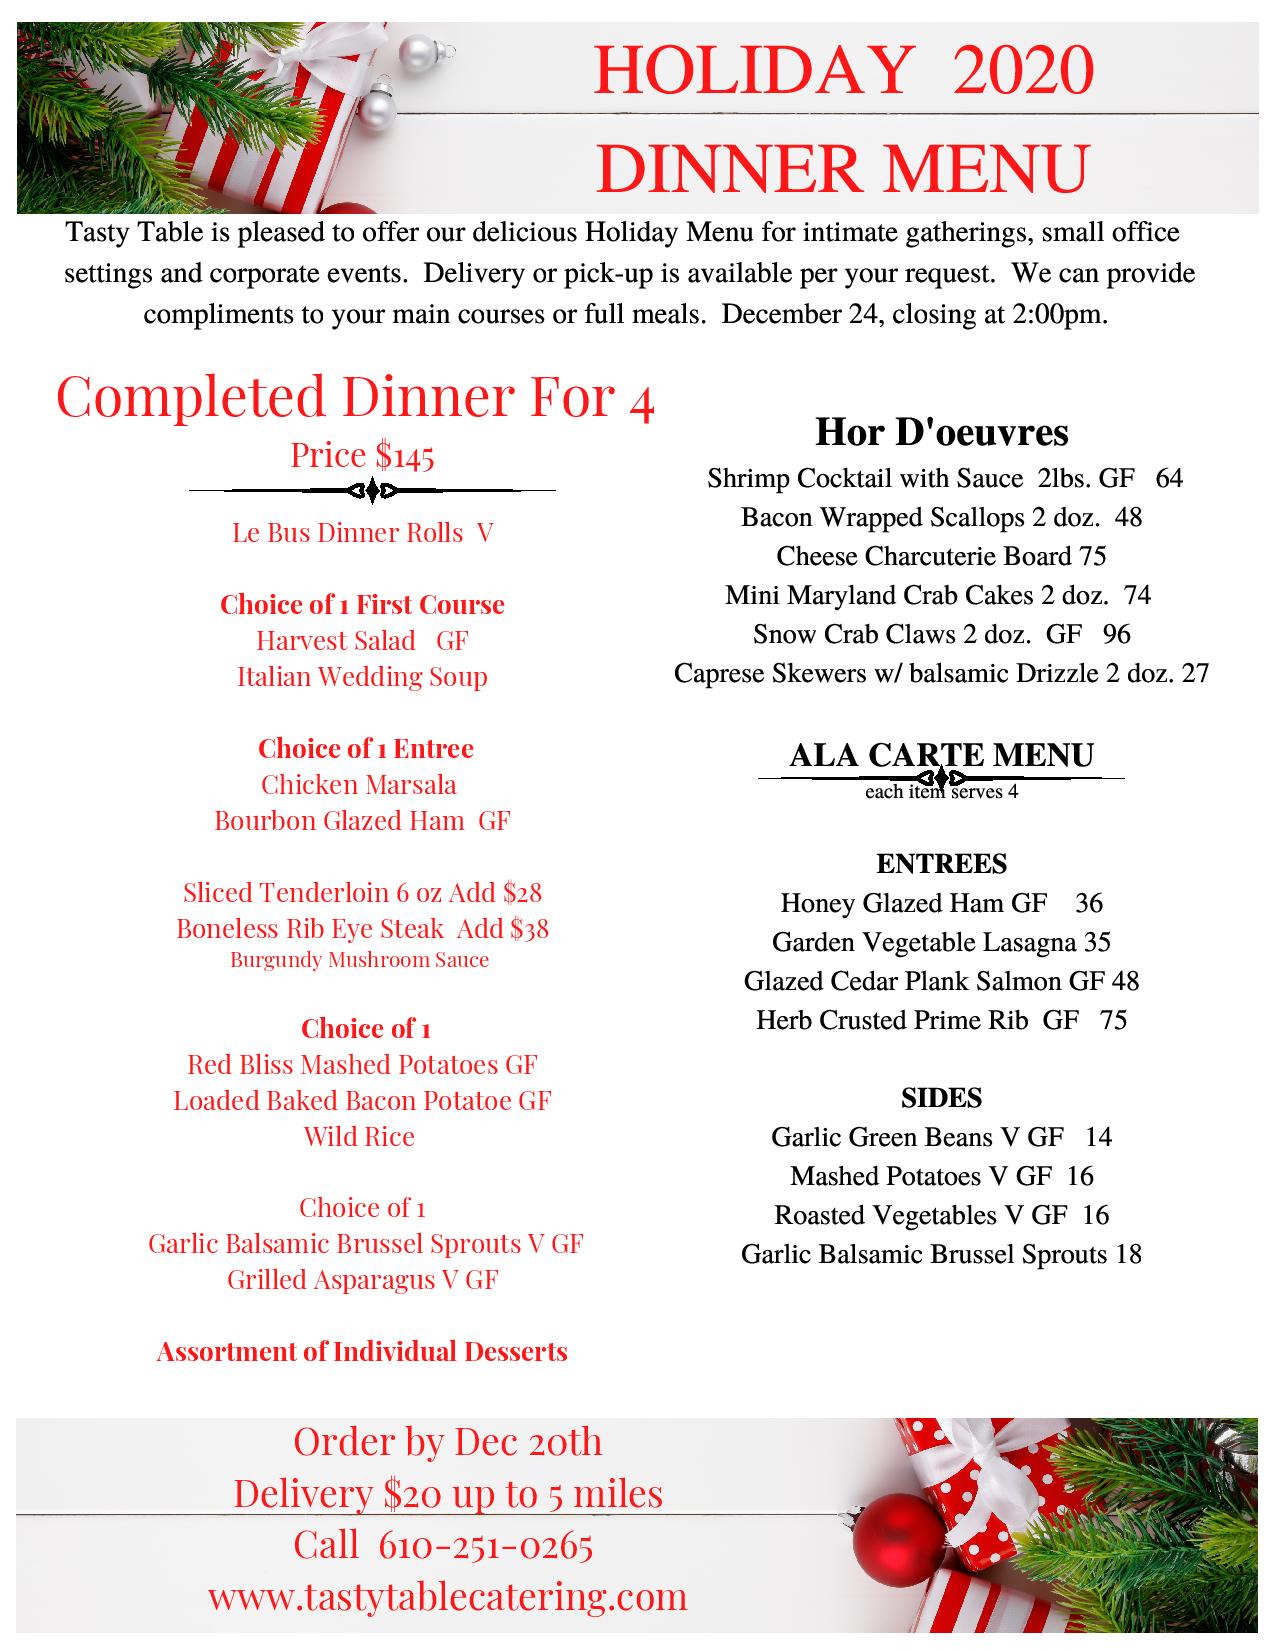 Main Line Holiday Catering Menu Tasty Table Catering